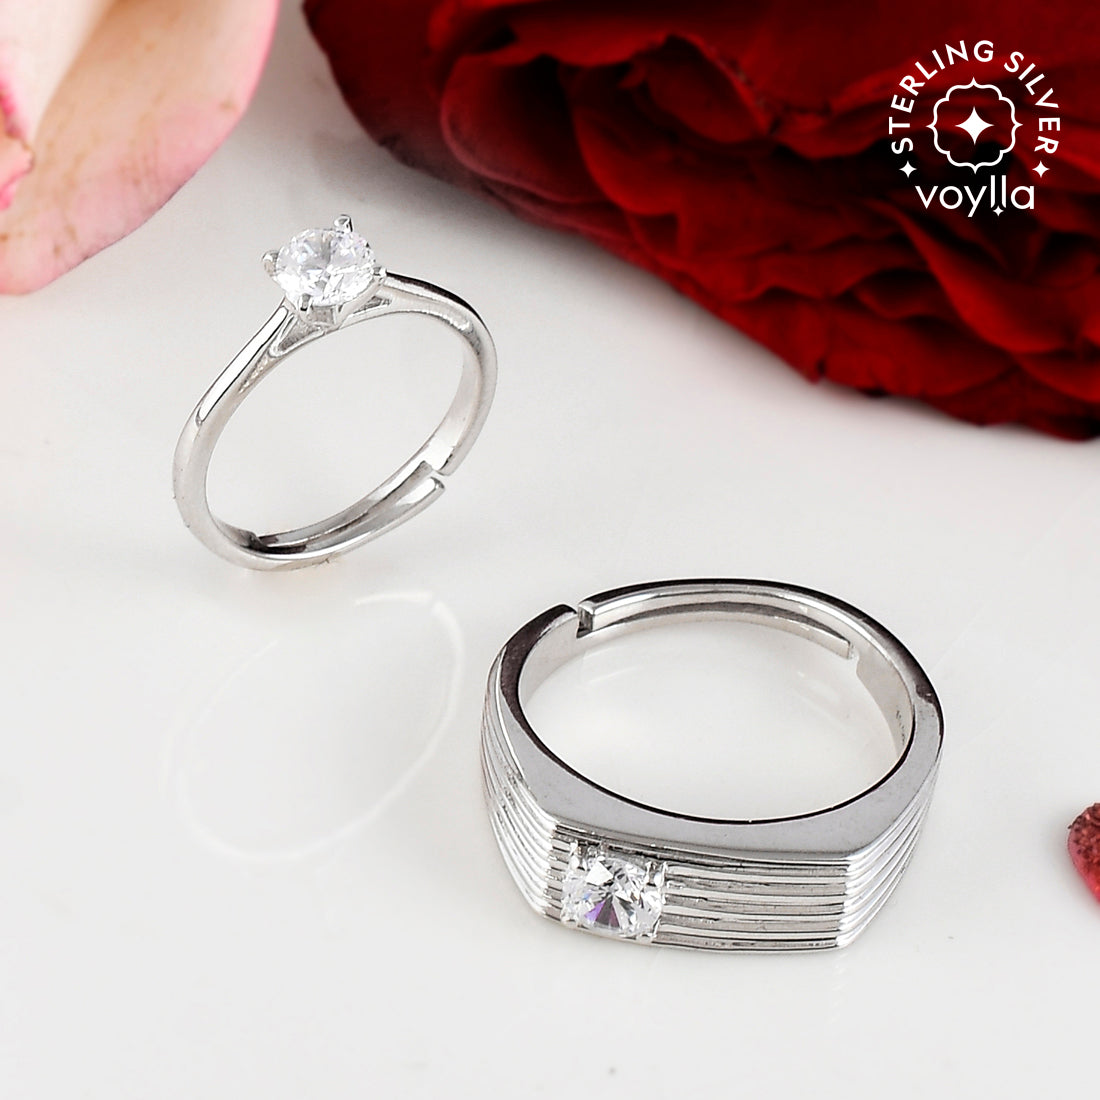 Buy quality 925 Sterling Silver Couple Rings in Ahmedabad